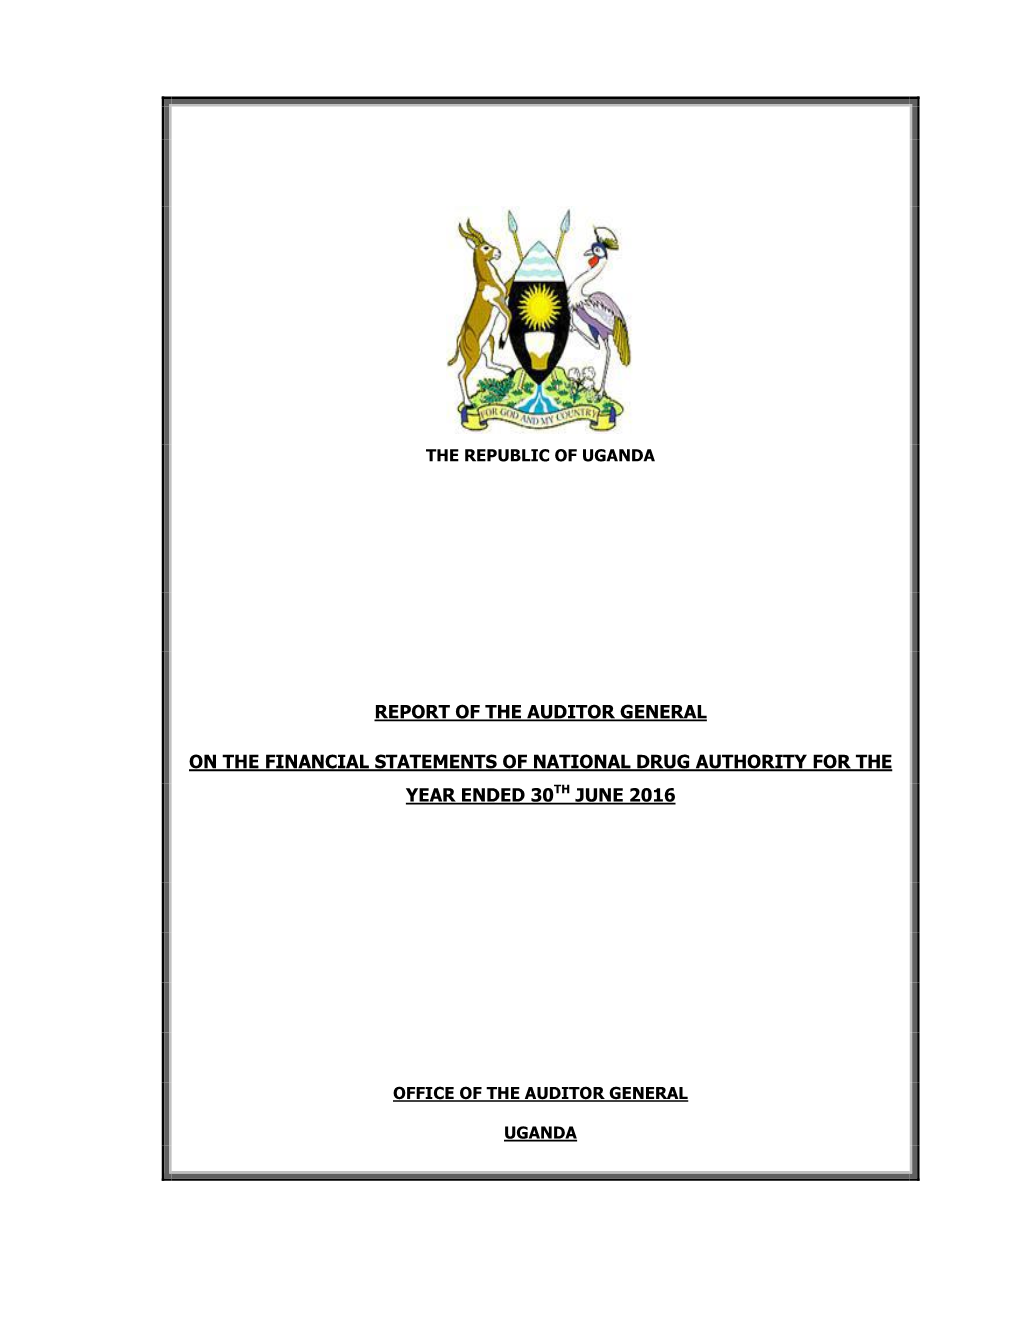 Report of the Auditor General on the Financial Statements of National Drug Authority for Year Ended 30Th June, 2016